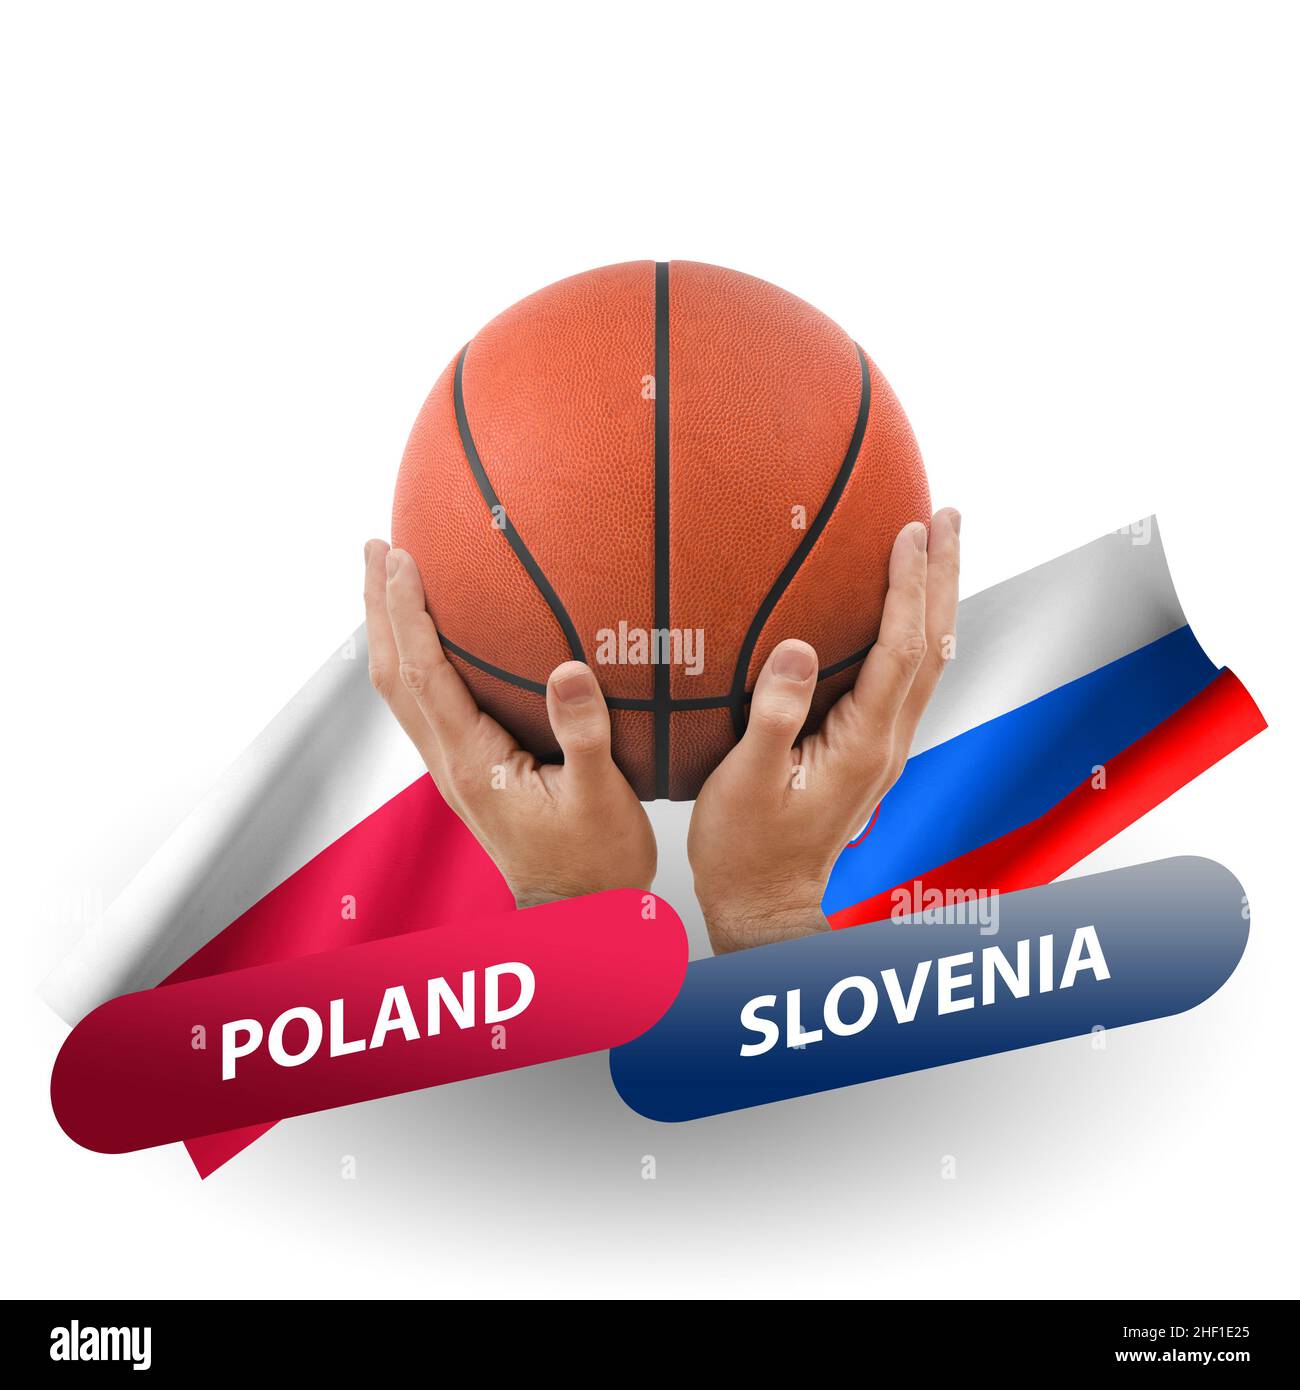 Poland vs slovenia Cut Out Stock Images & Pictures - Alamy